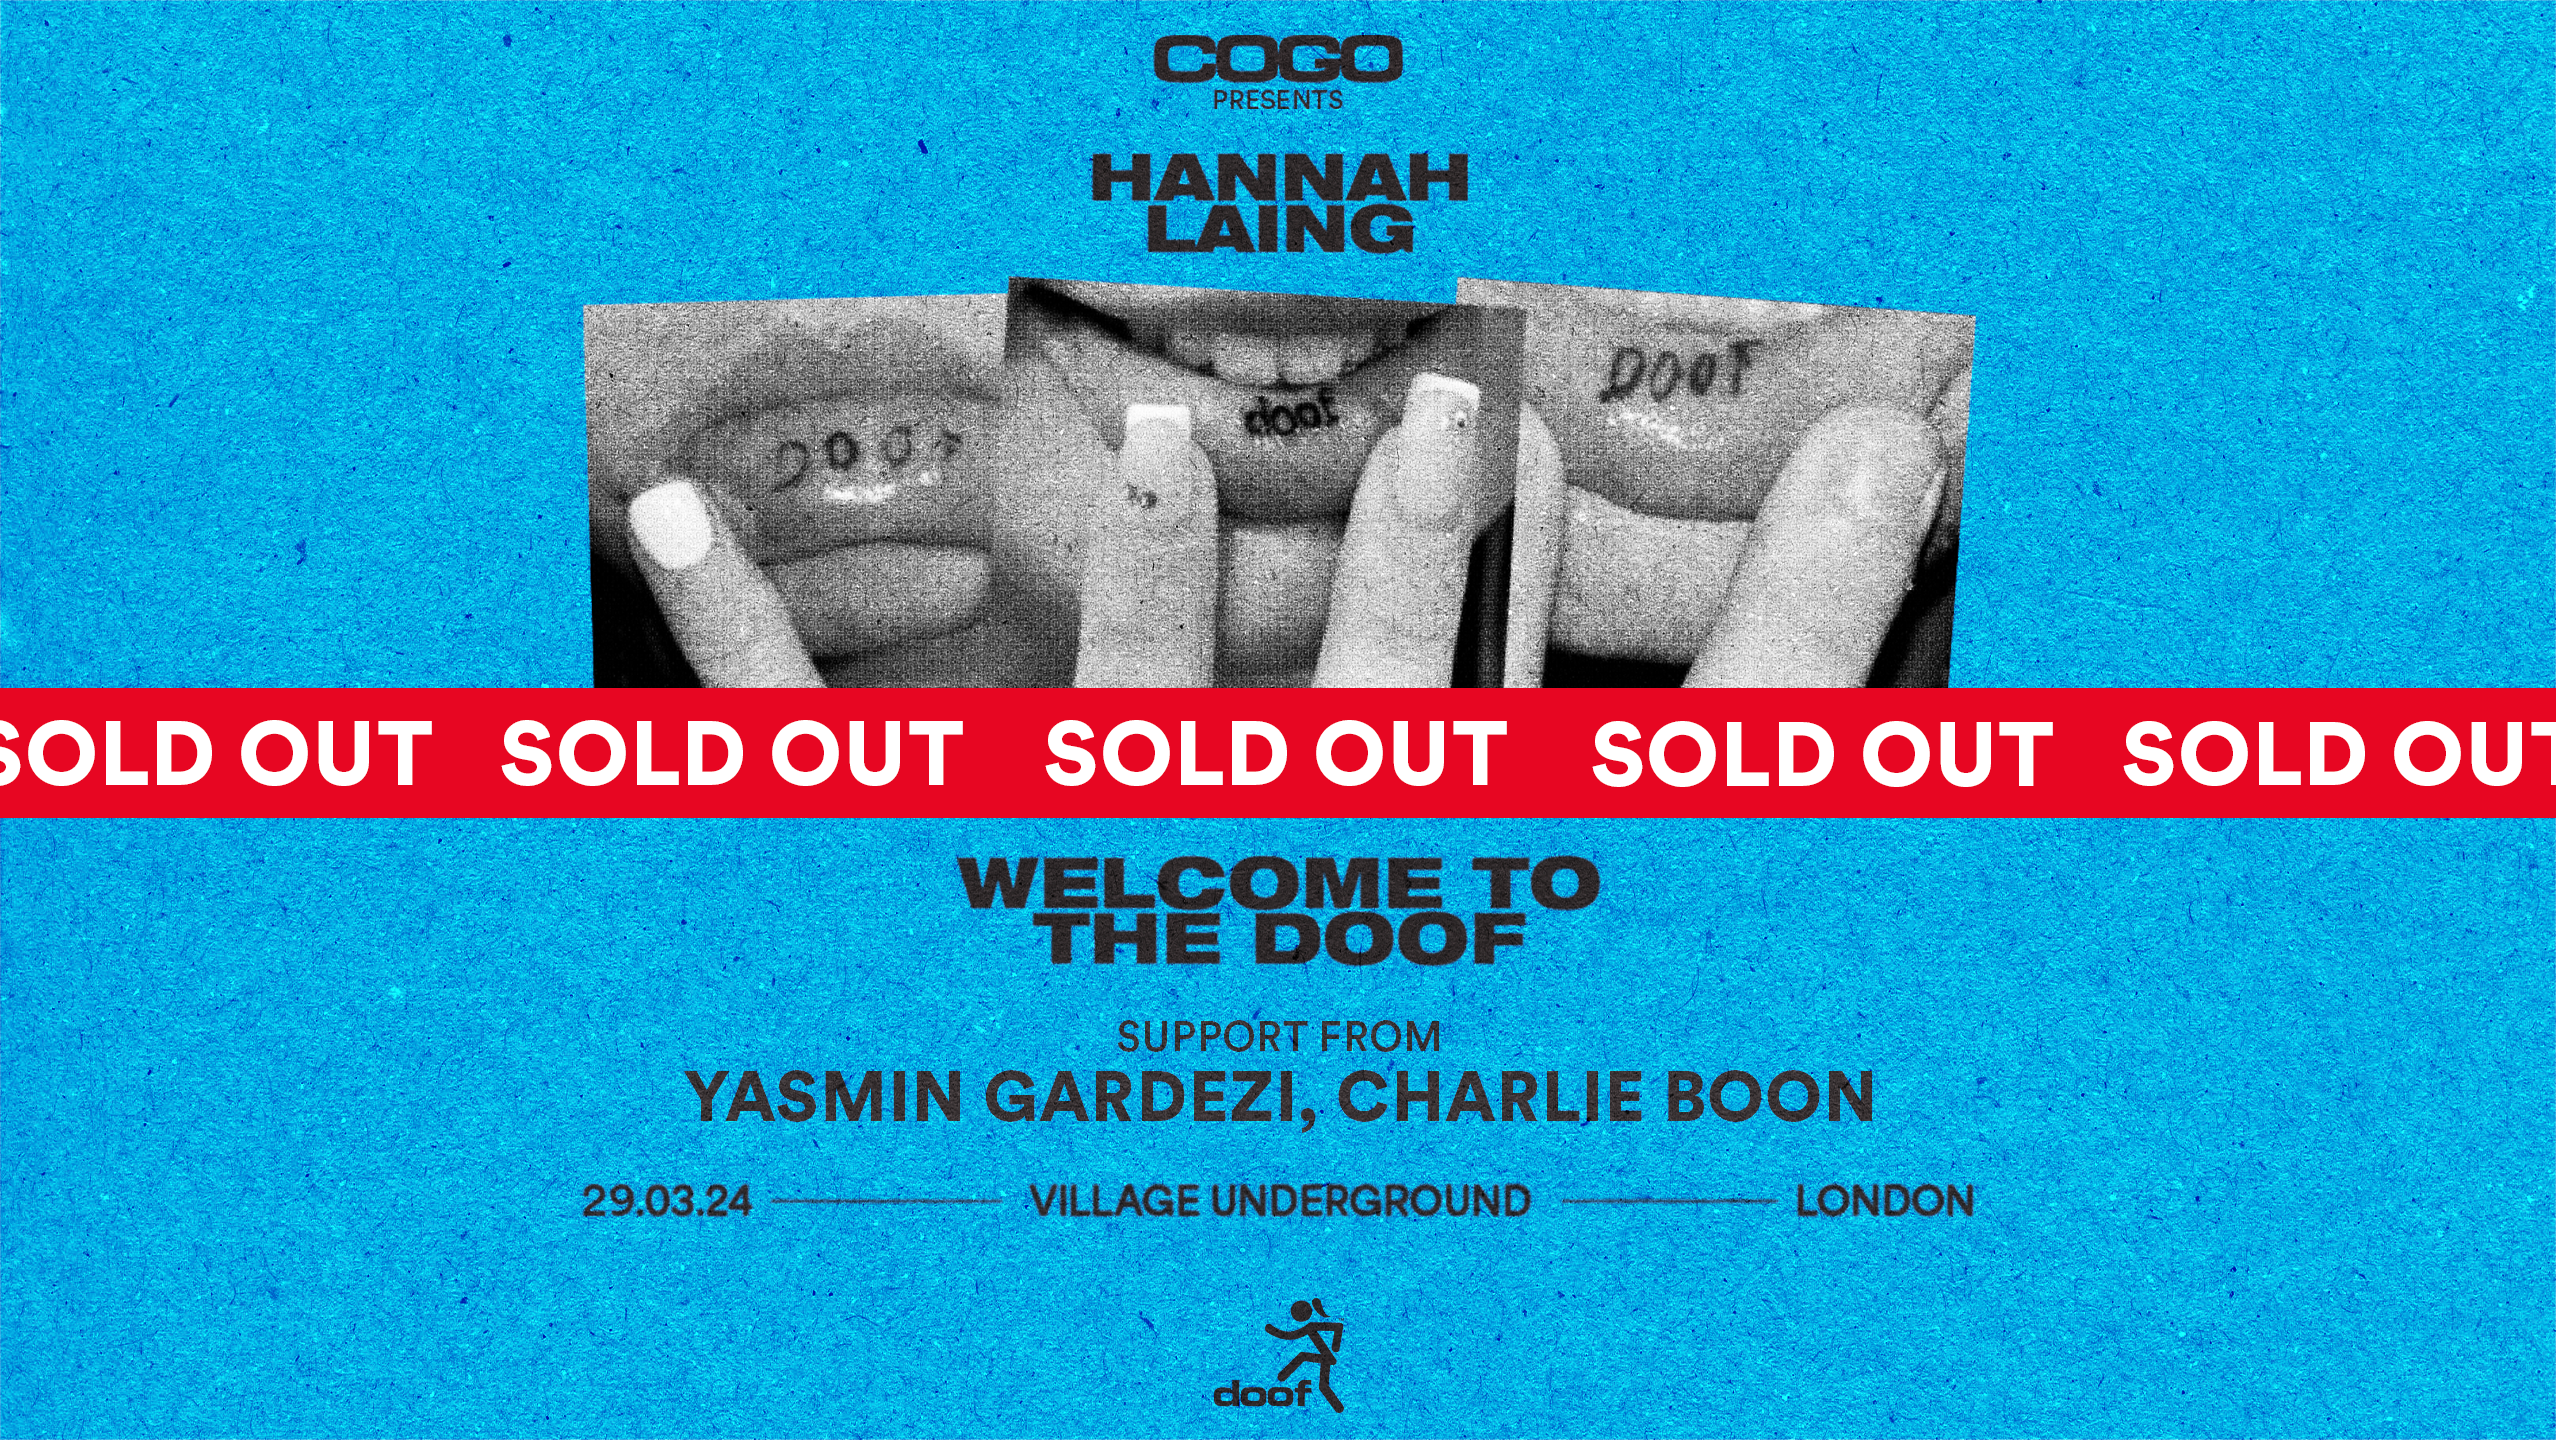 Hannah Laing presents Welcome to the Doof [SOLD OUT] - Página frontal